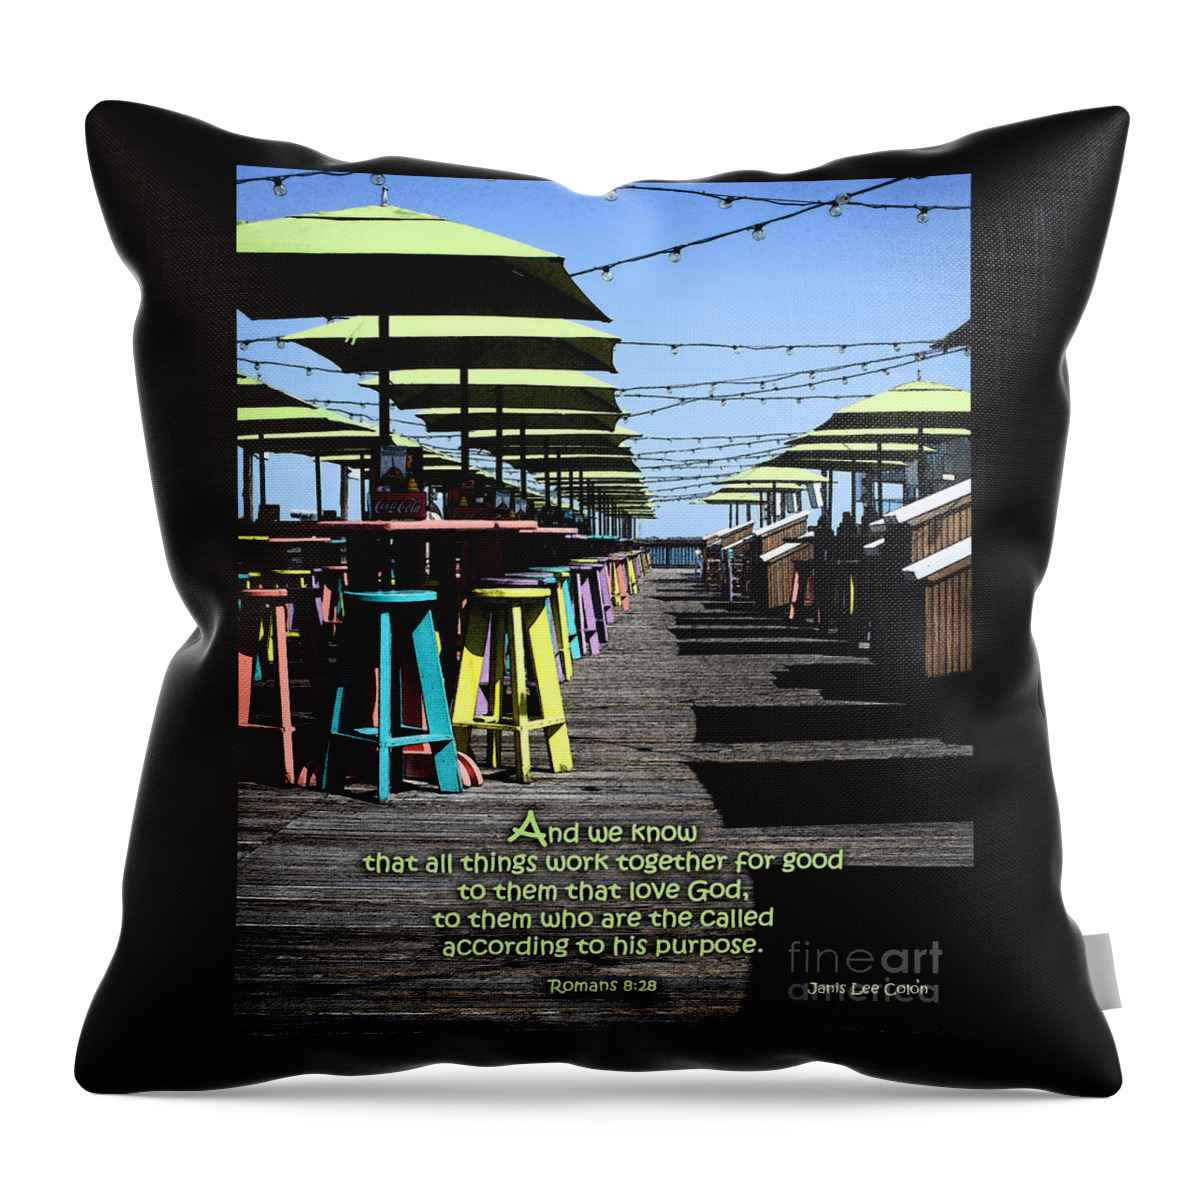 Key West Throw Pillow featuring the photograph Key West Pier Romans 8 by Janis Lee Colon